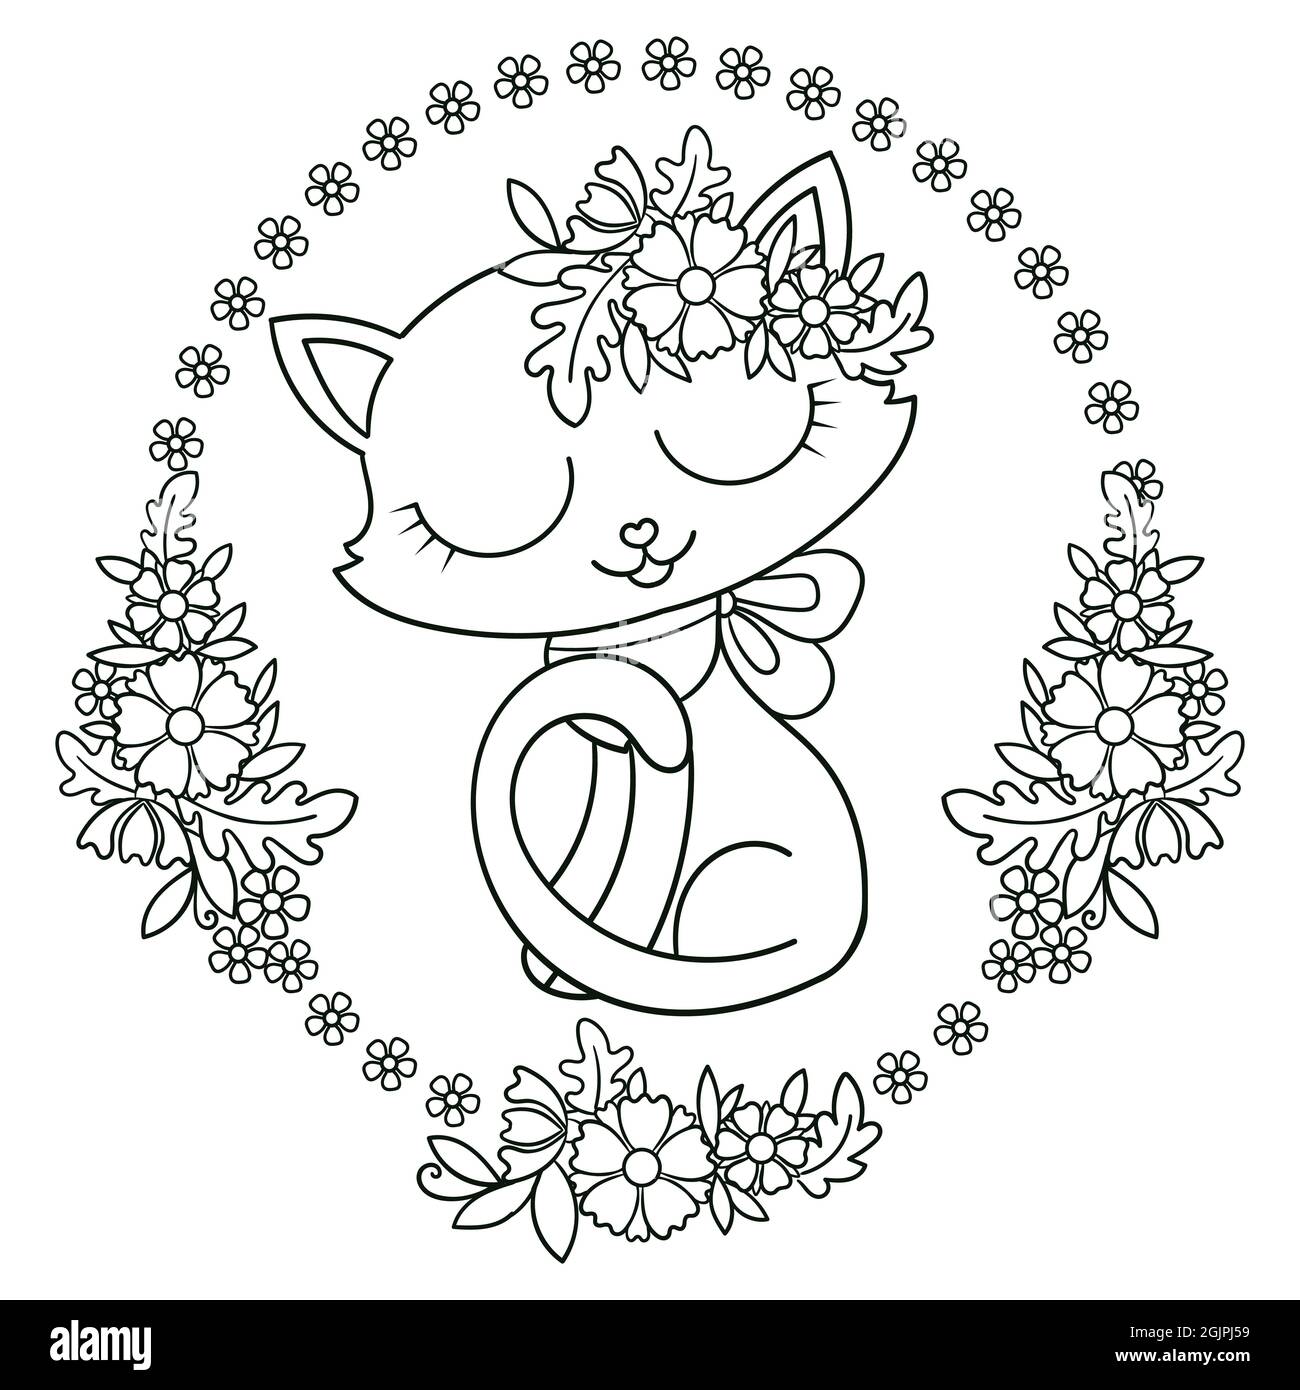 Cute cartoon kitten in an oval frame of flowers. Black and white linear image. Vector Stock Vector